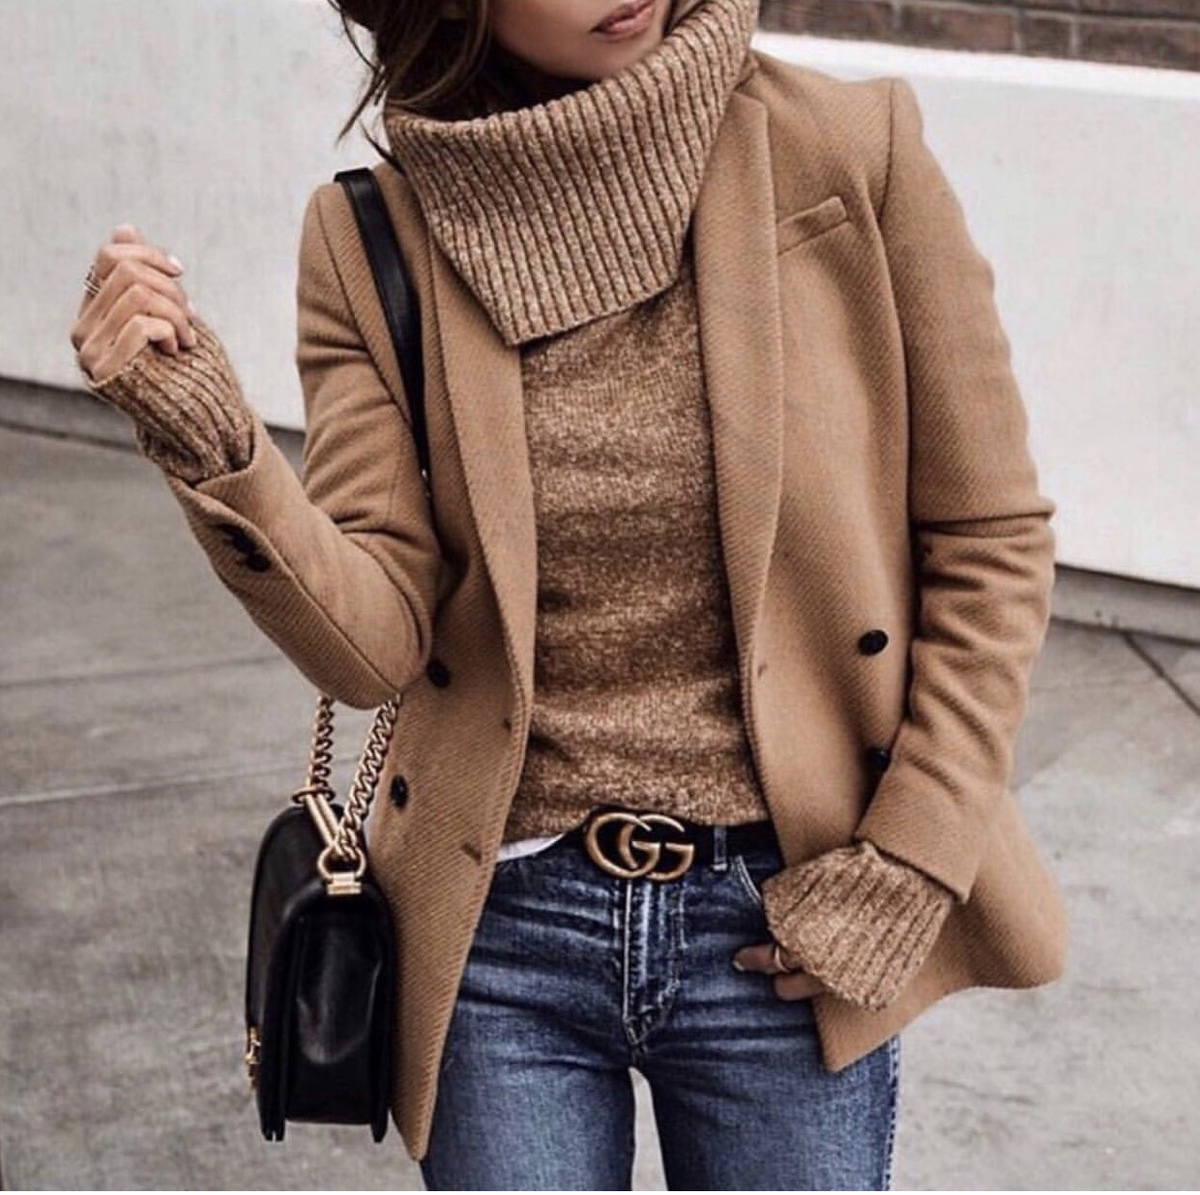 sweater styles, chic sweater styles, sweater styles of fall 2019, chunky turtleneck sweater, beige monochromatic outfit, fall outfit inspiration | lolario style